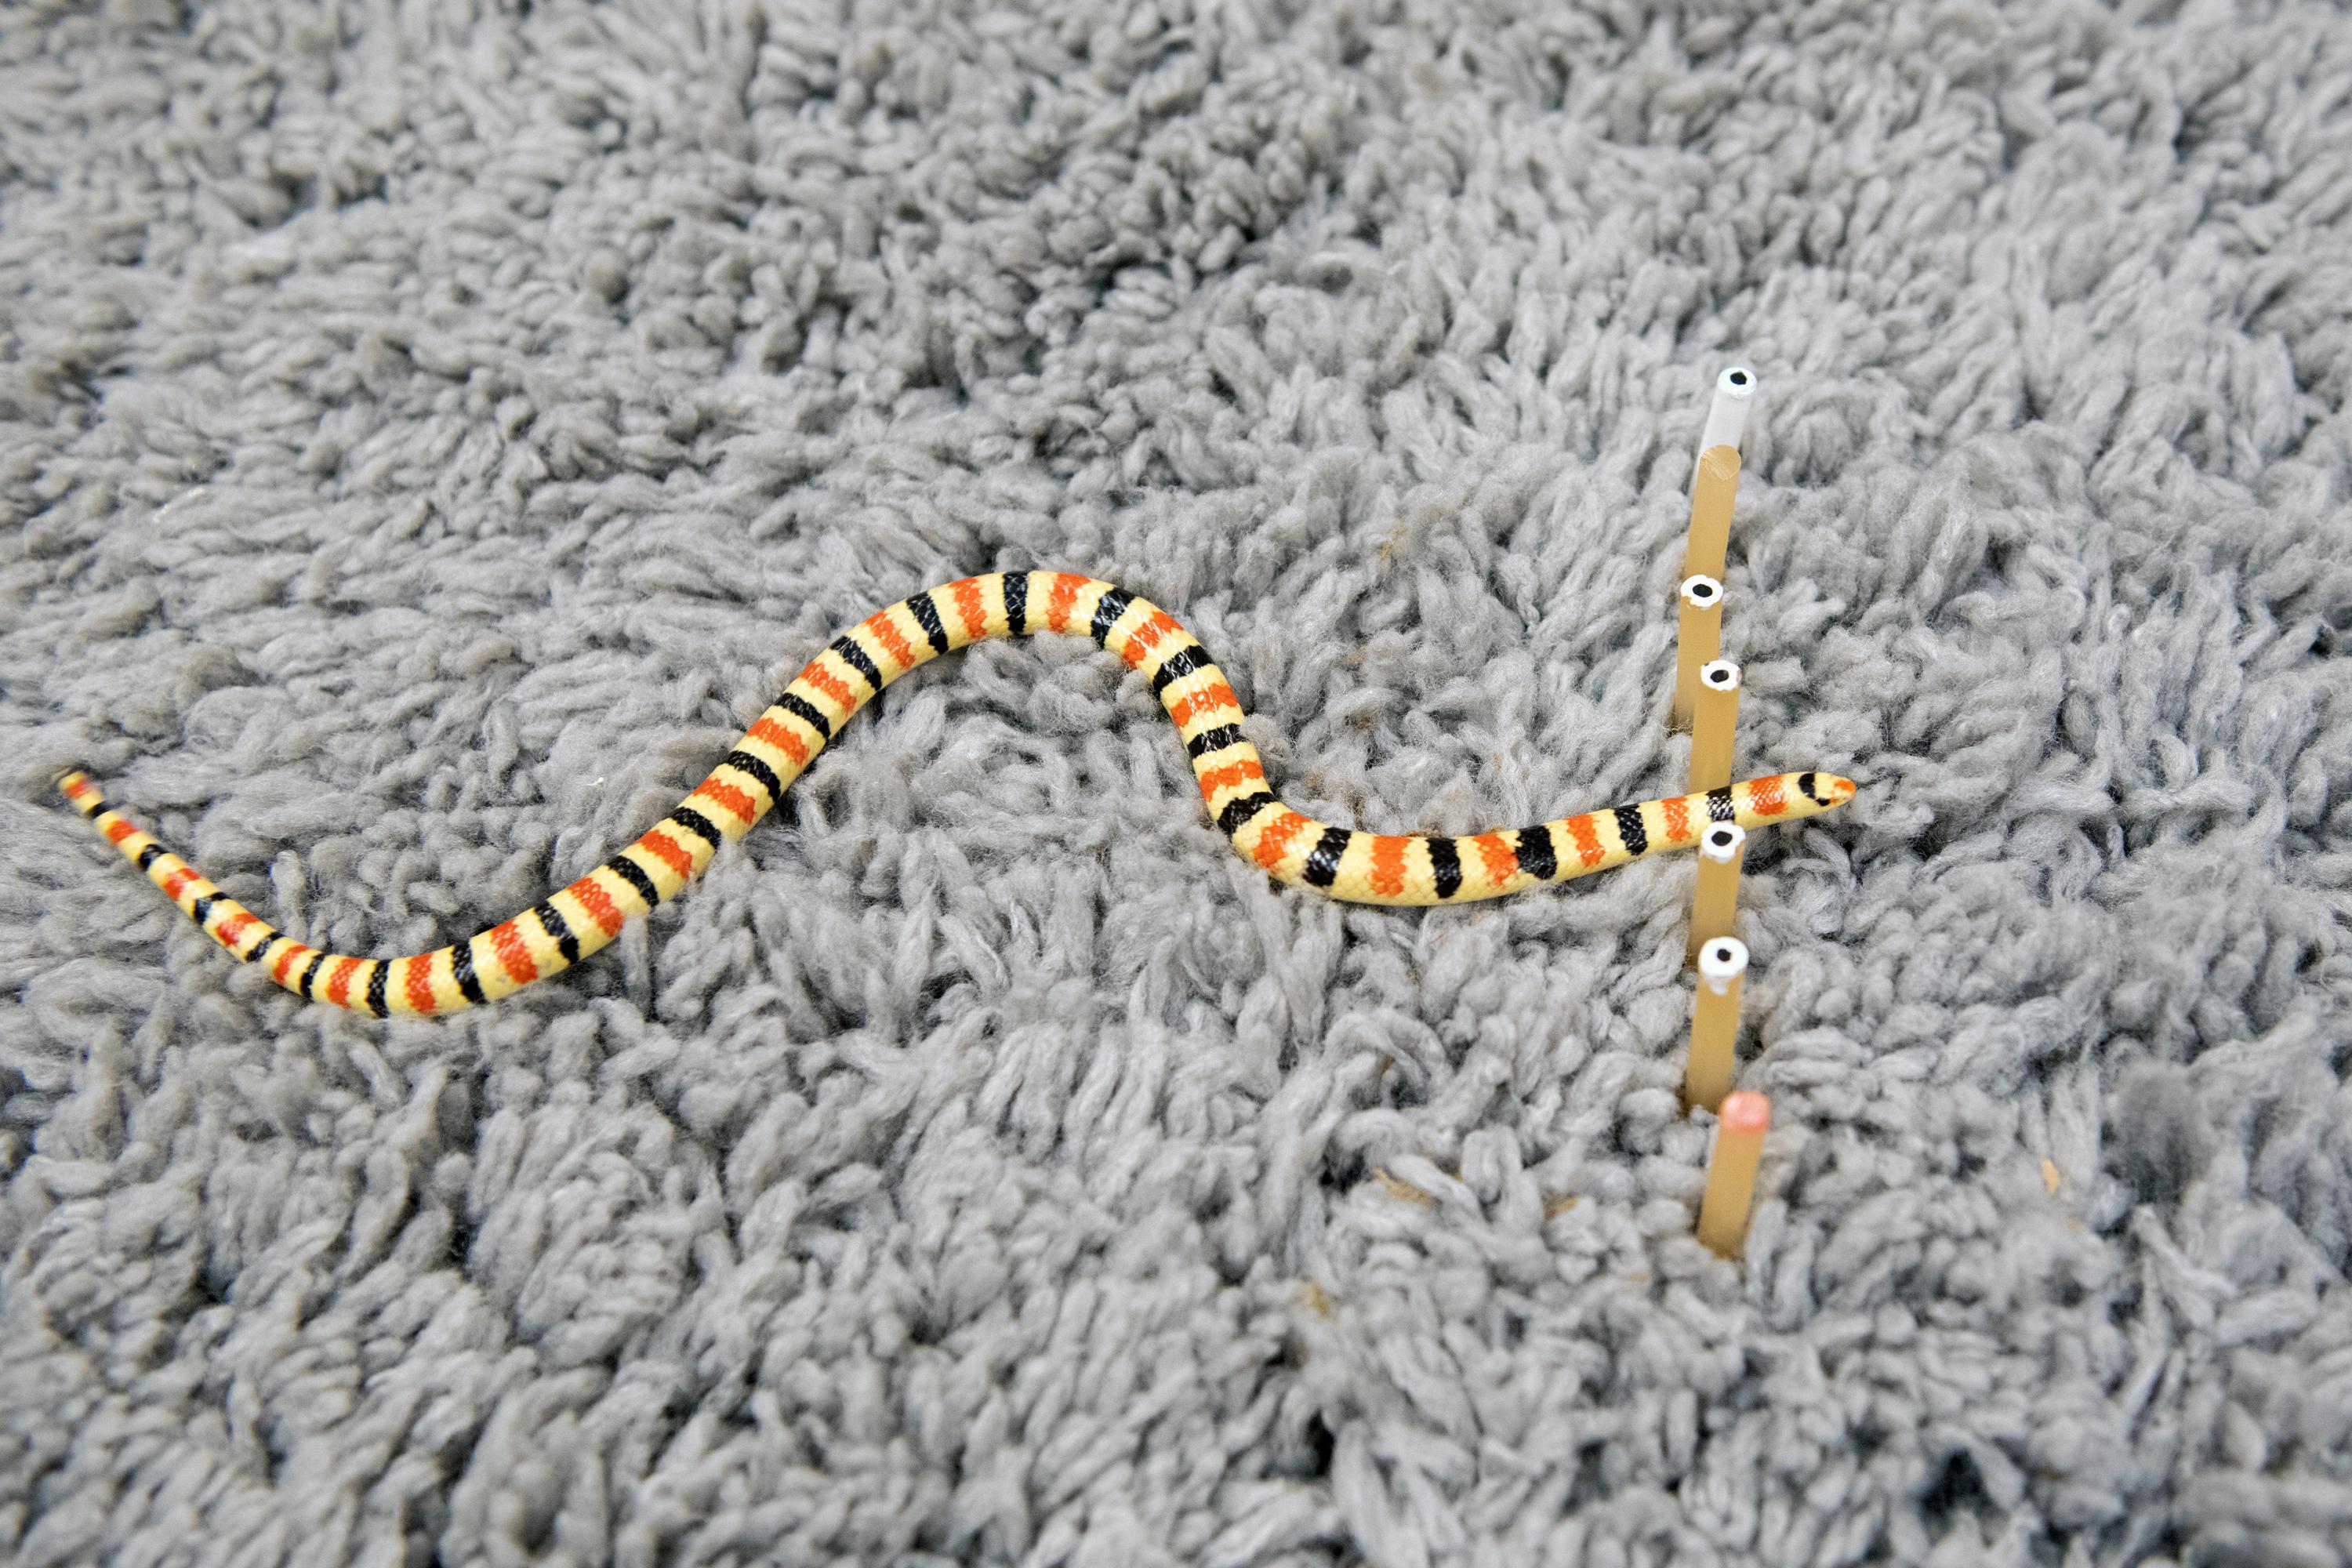 A Western Shovel-nosed snake moves through a force-sensitive set of rubber pegs. The pegs altered the direction of the snakes’ travel, but didn’t vary the waveform they used to move. (Photo: Allison Carter, Georgia Tech)